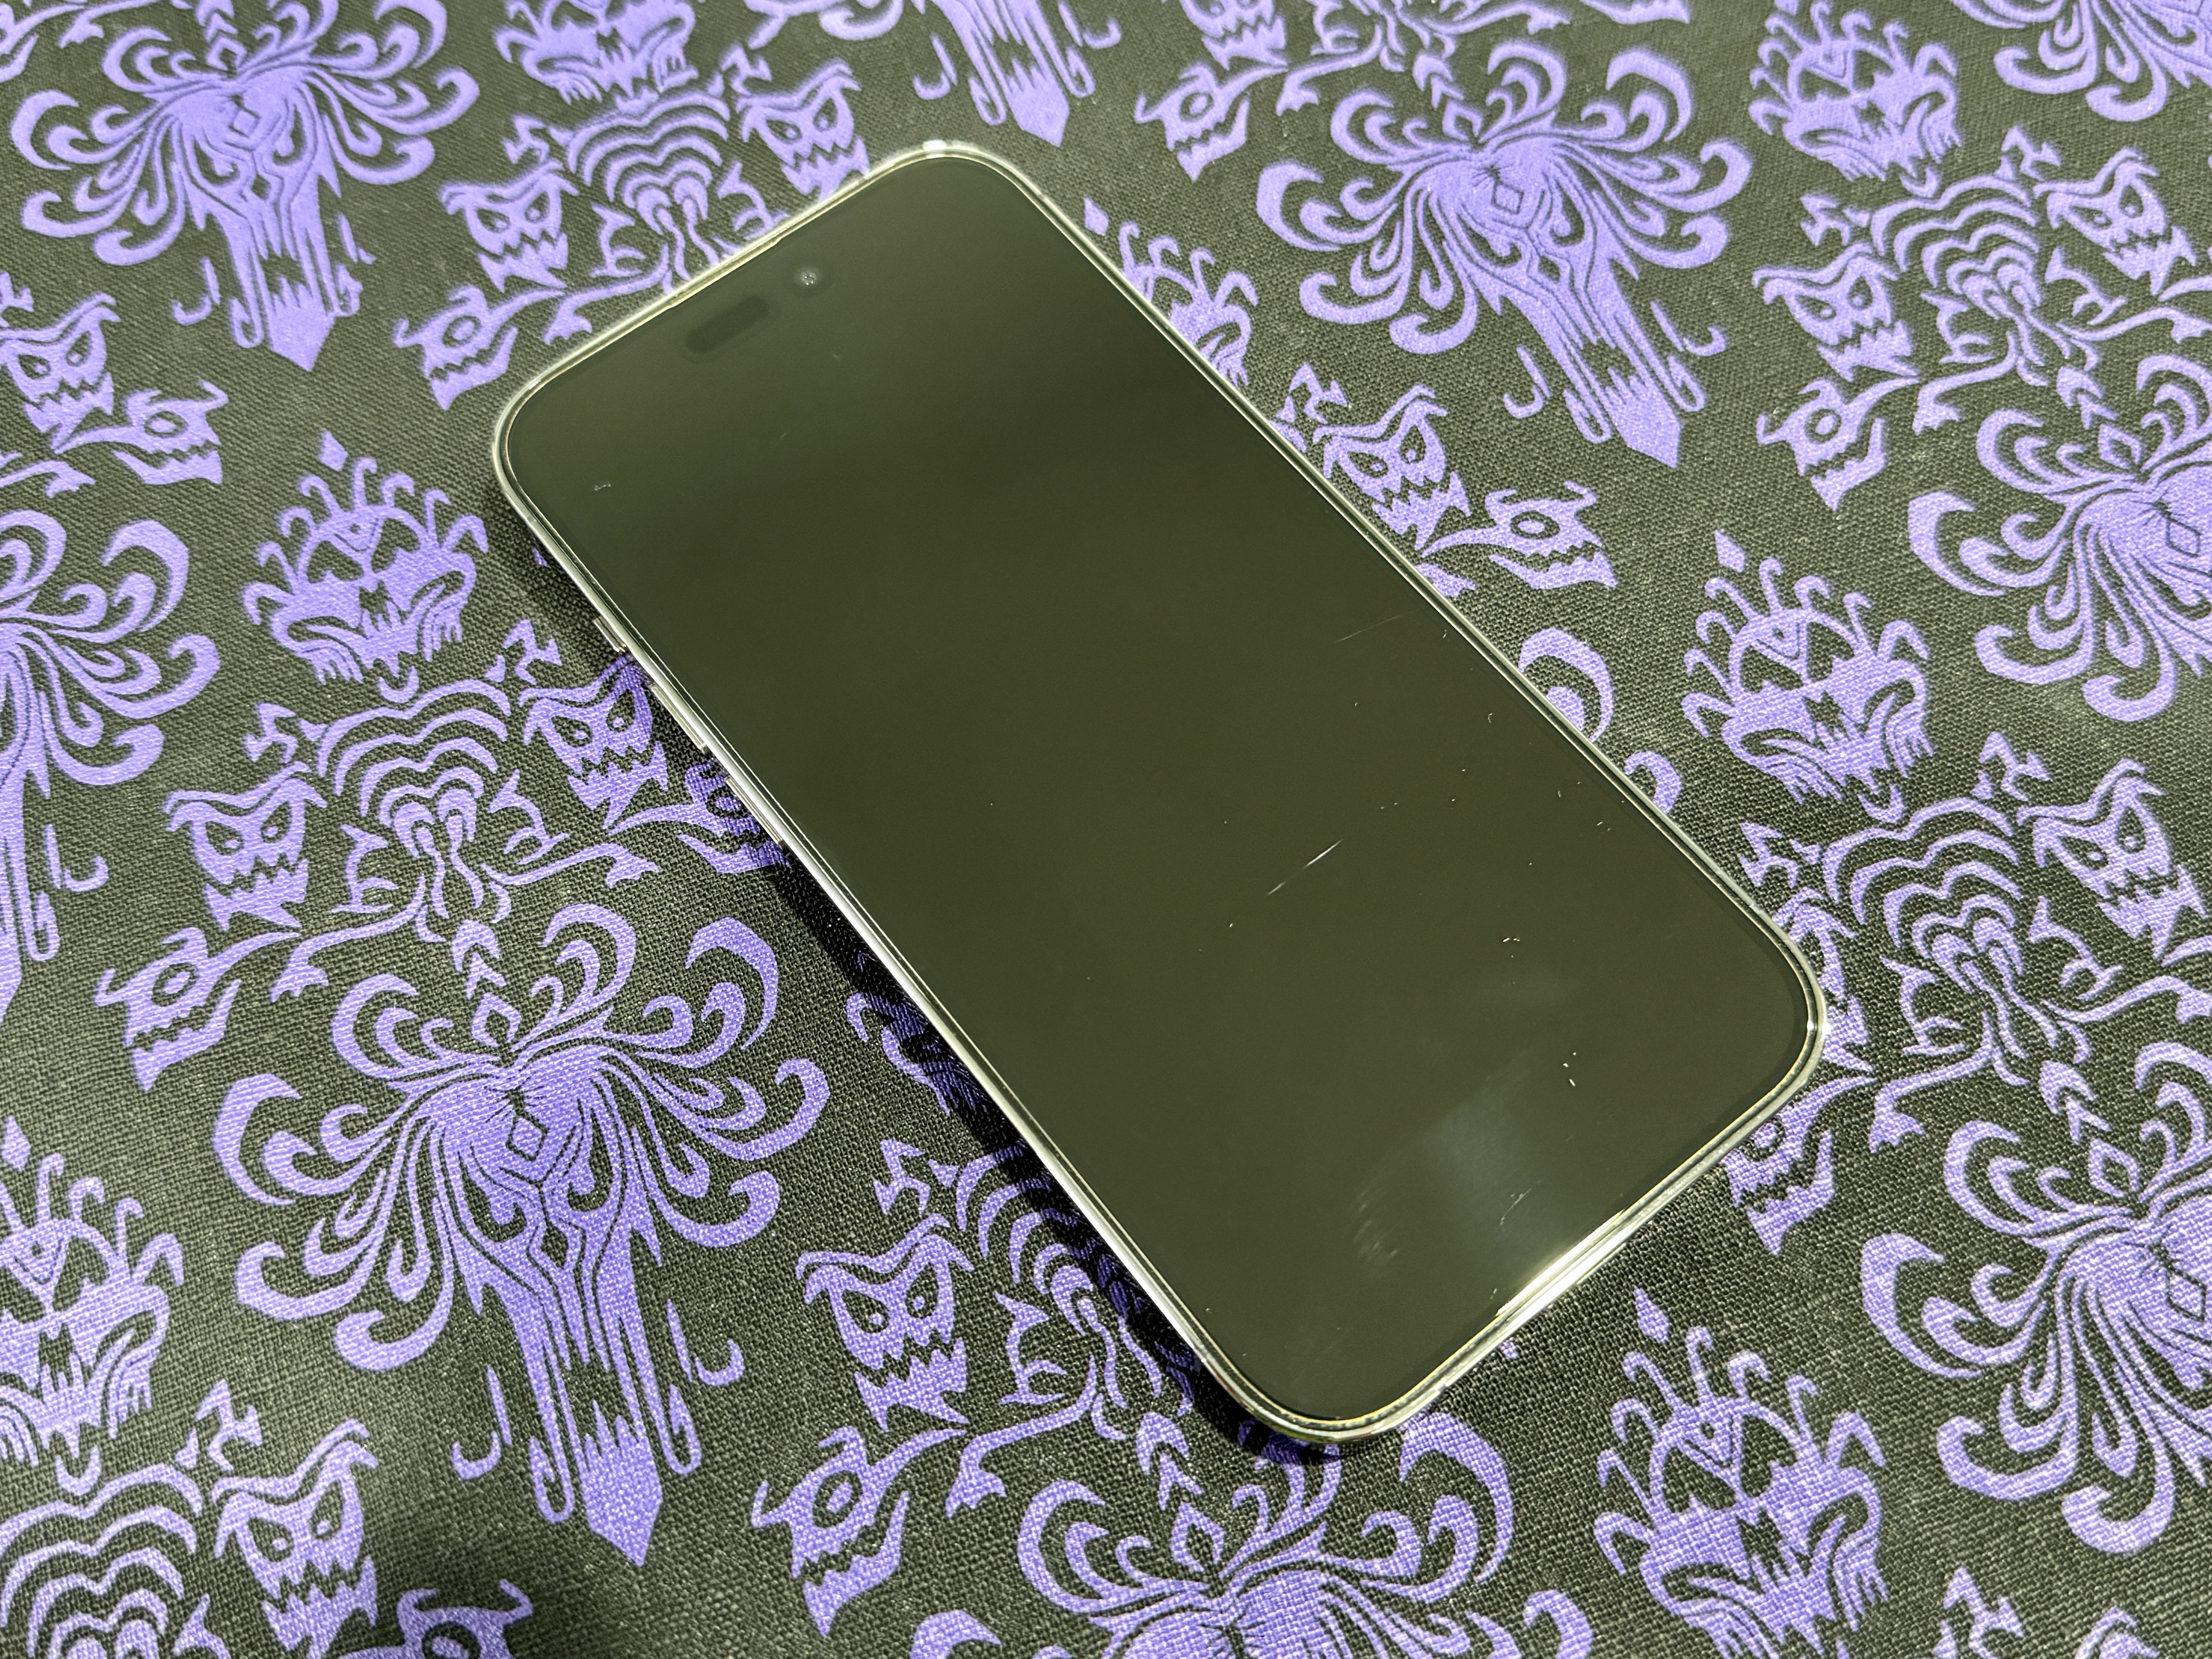 Scratches are seen on a screen protector on Christine's iPhone 14 Pro.